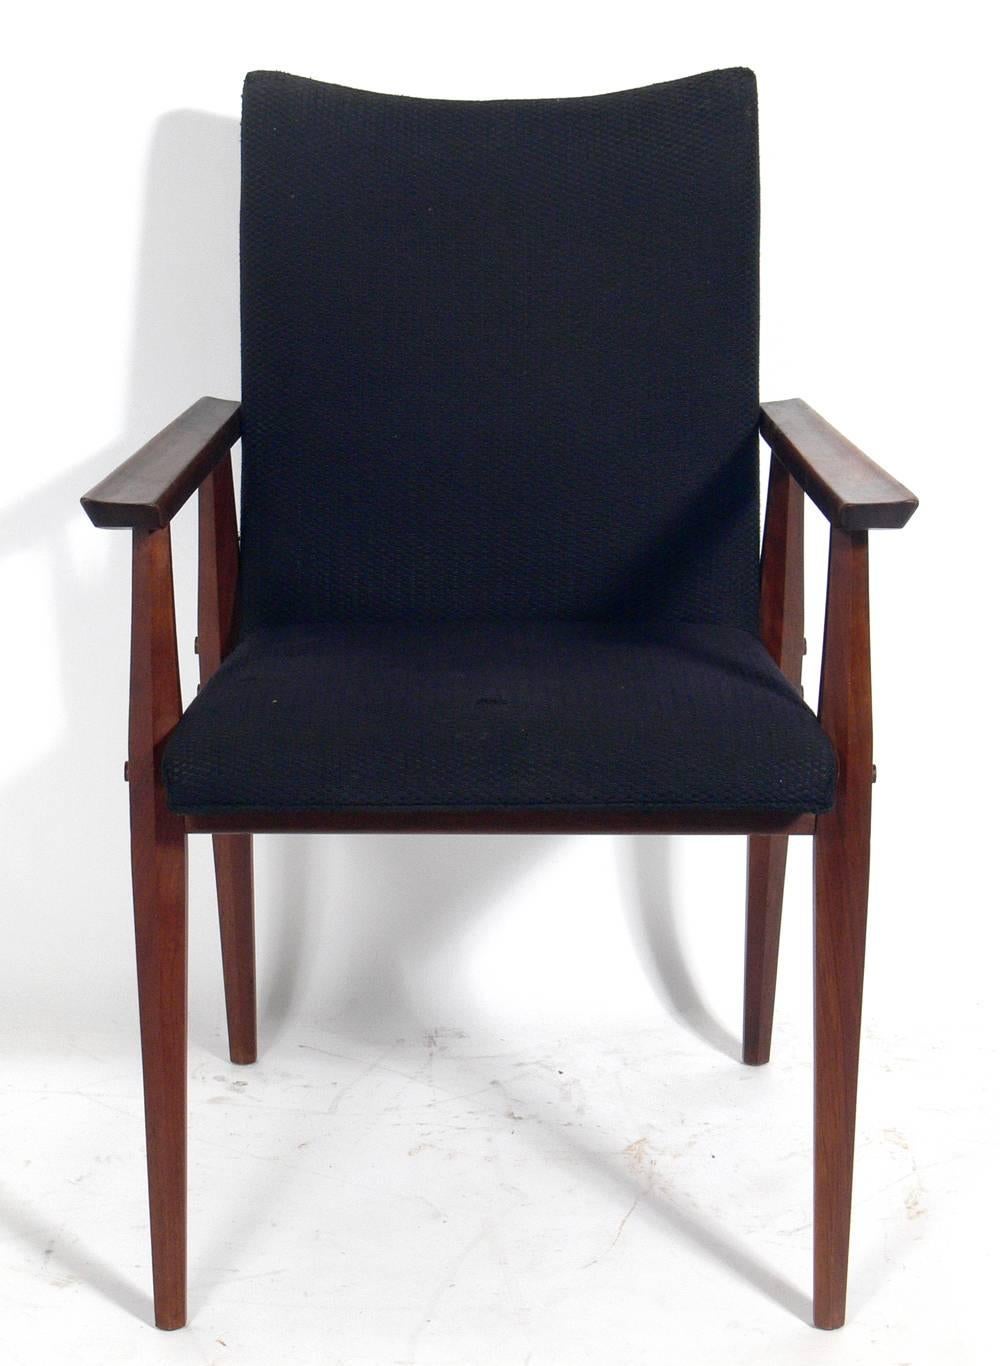 Dining table and chairs, designed by George Nakashima for Widdicomb, American, circa 1950s. This set is currently being refinished and reupholstered. The price noted below includes refinishing in your choice of color and reupholstery in your fabric.